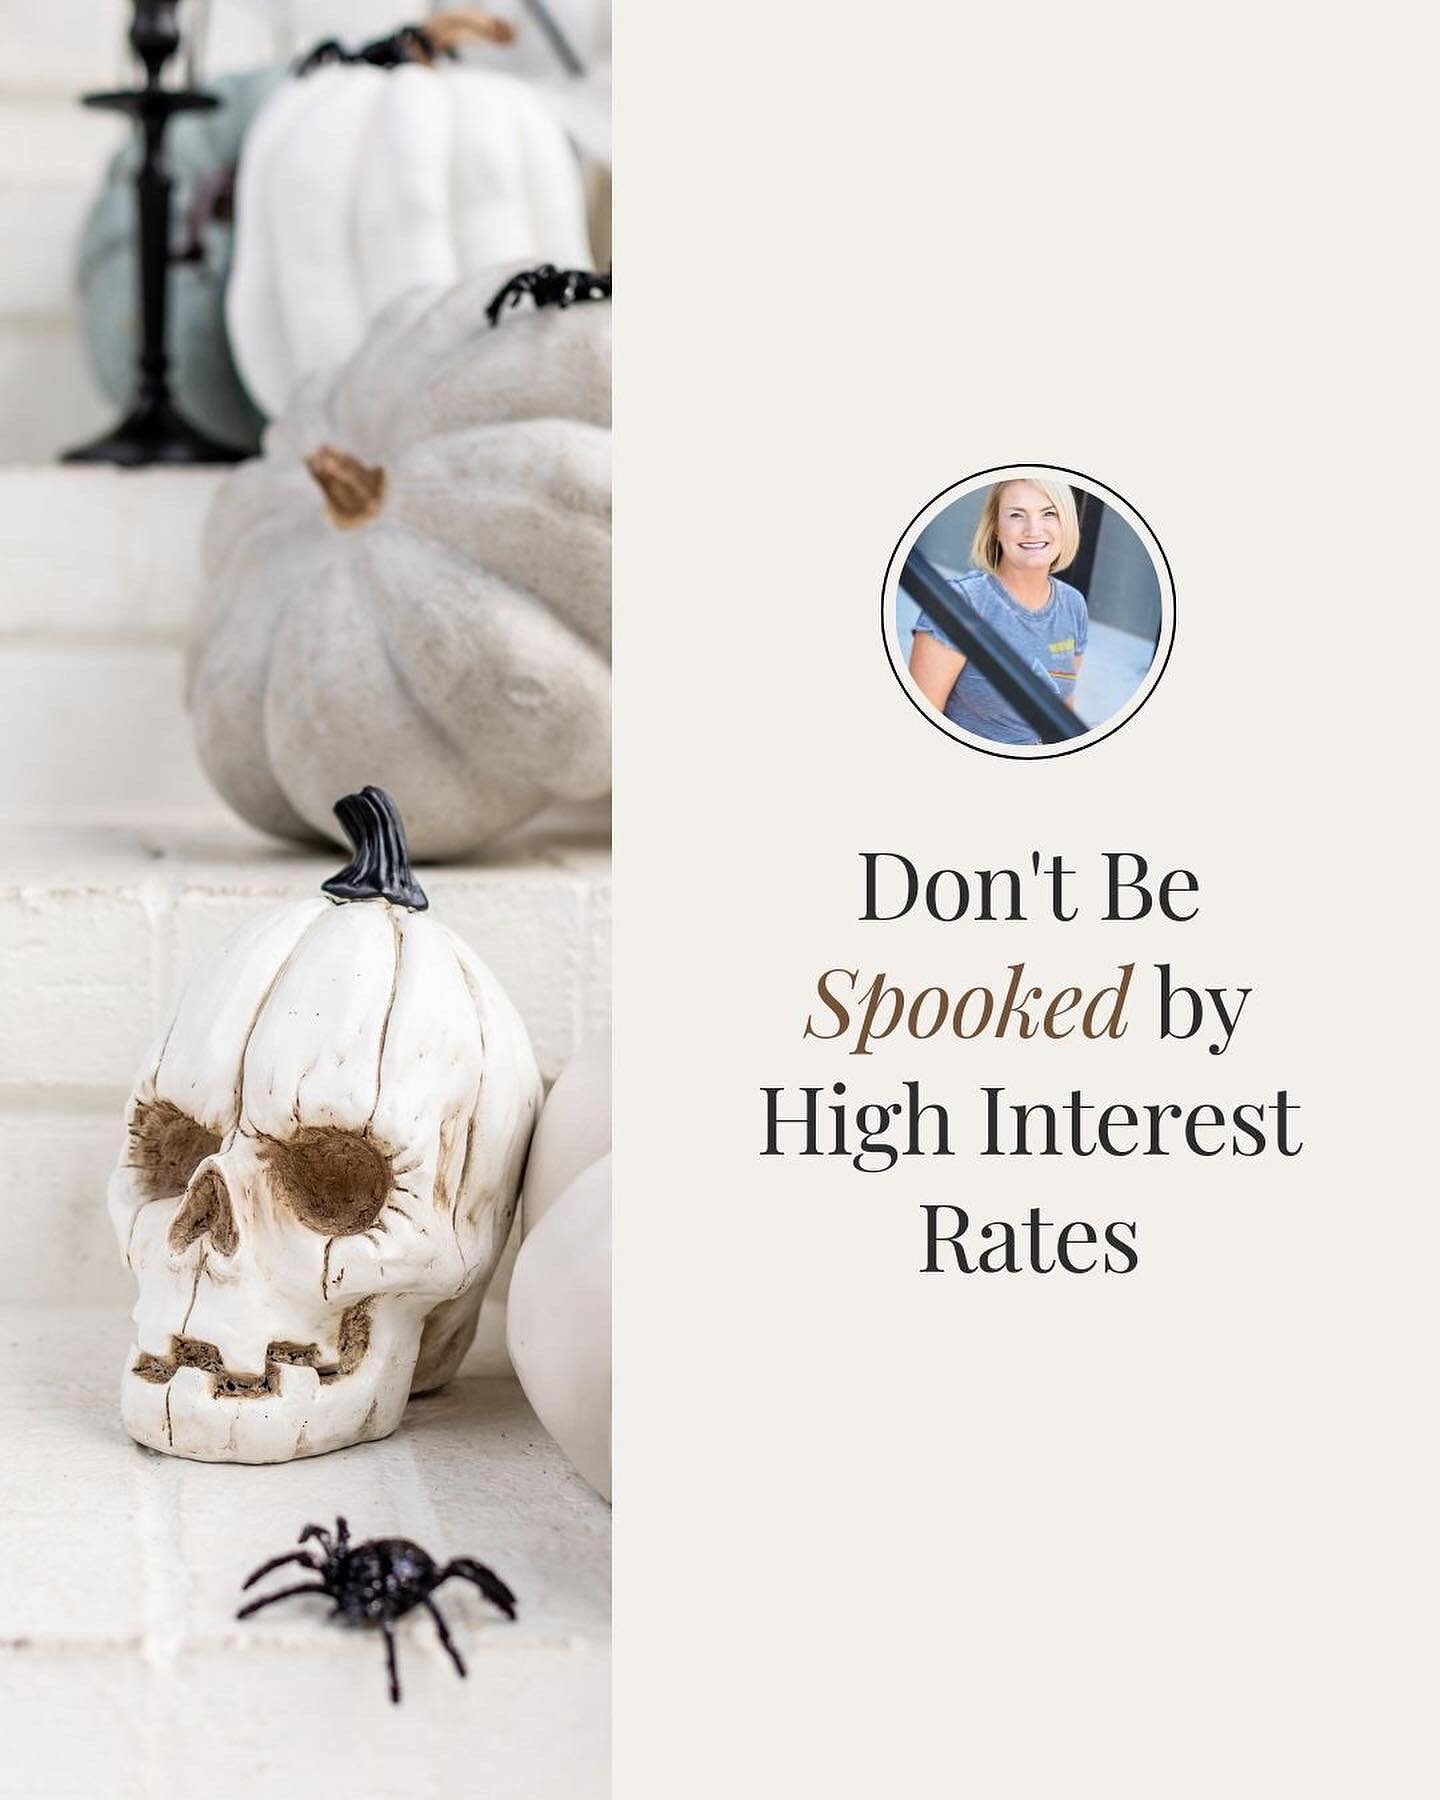 Buyers, don&rsquo;t be spooked this October by high interest rates! Here&rsquo;s why:&nbsp;

- An increase in rates will cost you more, but it may not be as much as you think. Example: A $300,000 loan with a 5% fixed rate comes out to roughly $1,610 